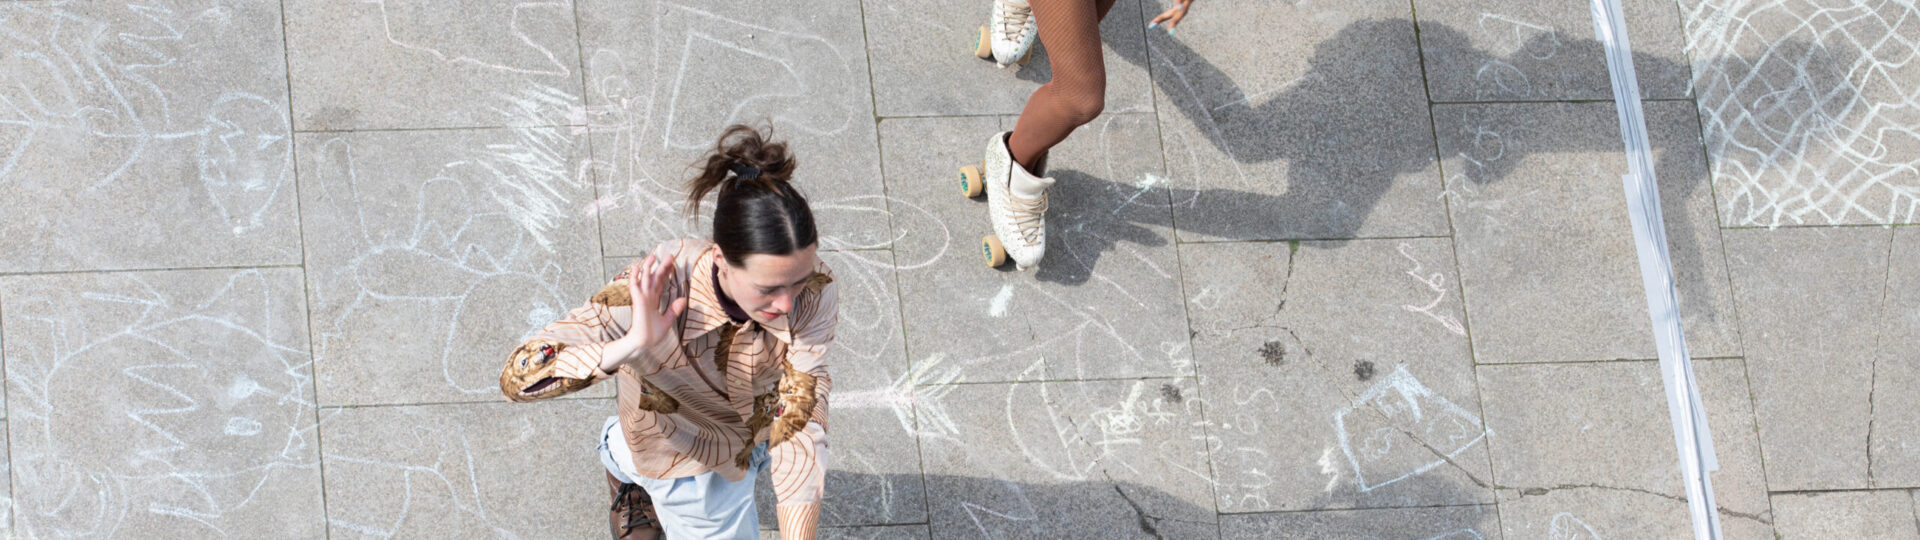 Two people dressed in bright outfits roller skate on a chalk-drawn pavement, viewed from above. The ground is decorated with various chalk drawings.